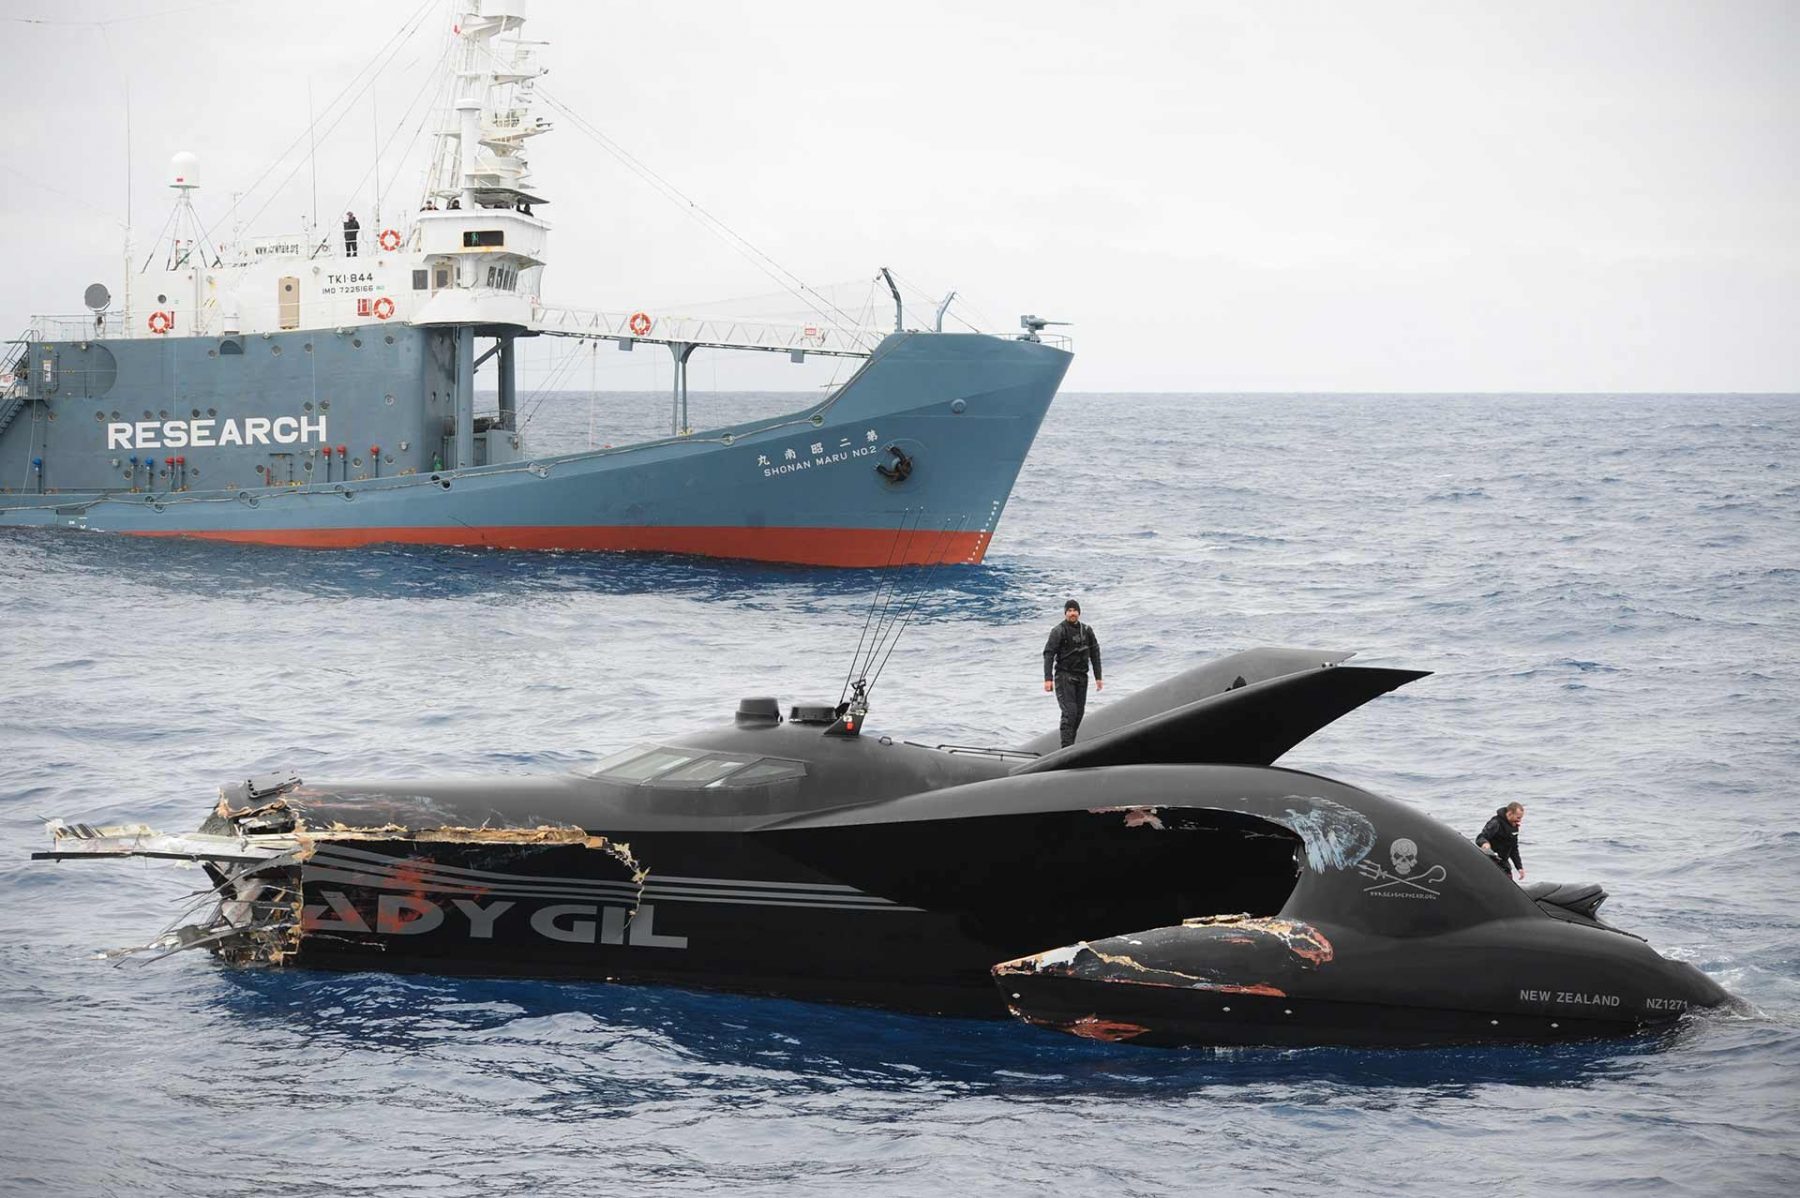 During clashes between Sea Shepherd Conservation Society and the Japanese whaling fleet in the southern ocean, the Ady Gil was rammed by the Shonan Maru II. The boat later sunk. Crew sustained injuries but there were no mortalities. No charges were laid. Antarctic ocean, 2010